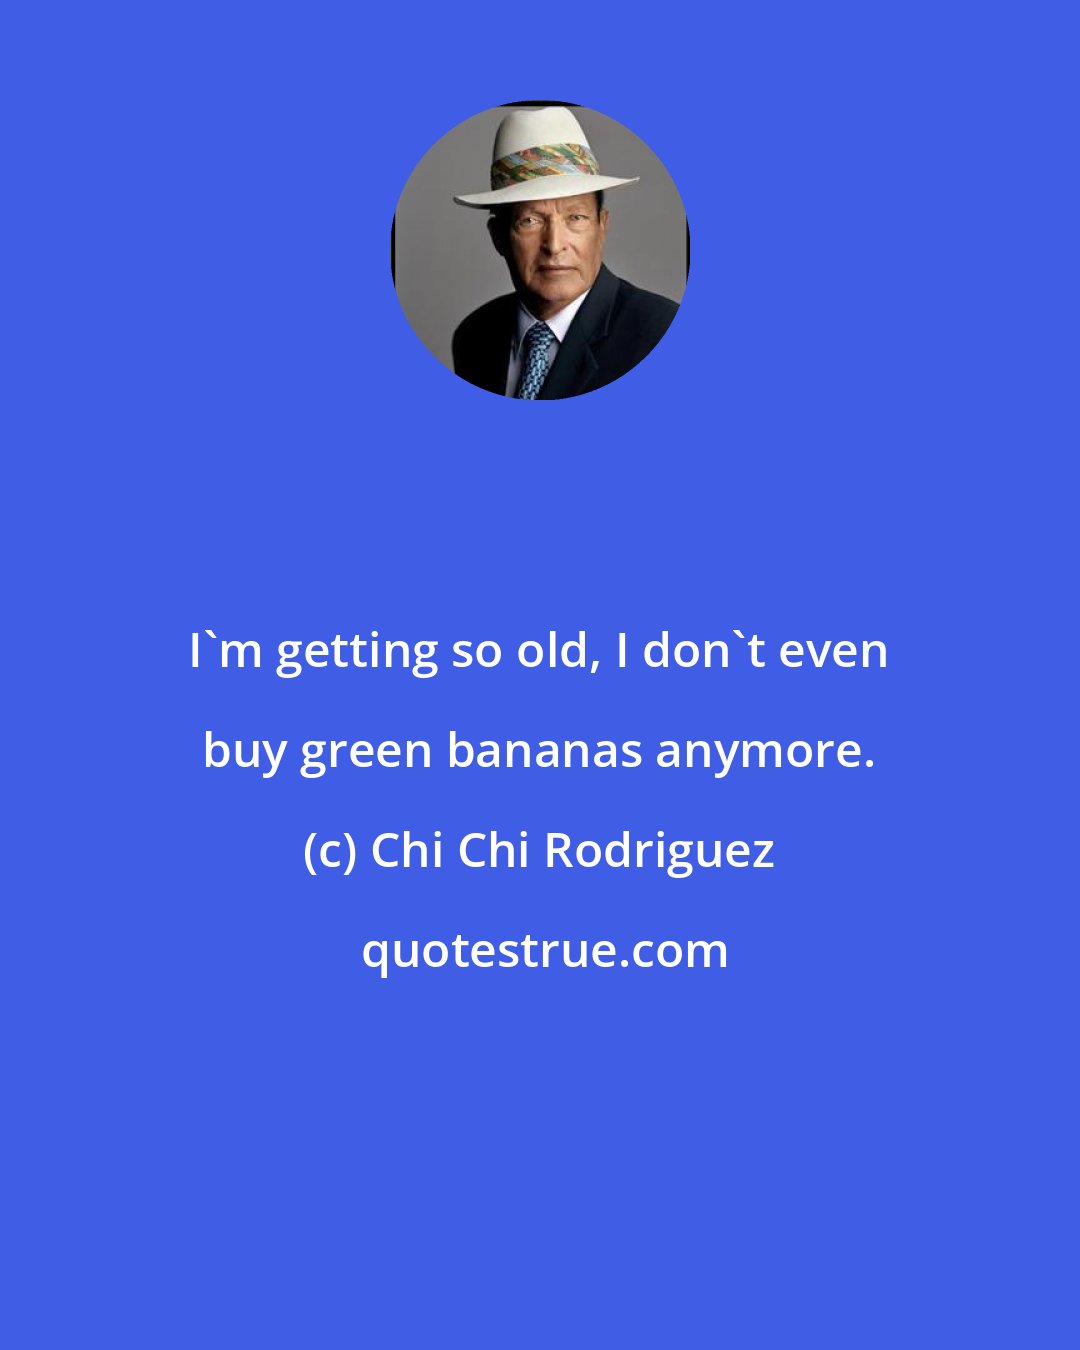 Chi Chi Rodriguez: I'm getting so old, I don't even buy green bananas anymore.